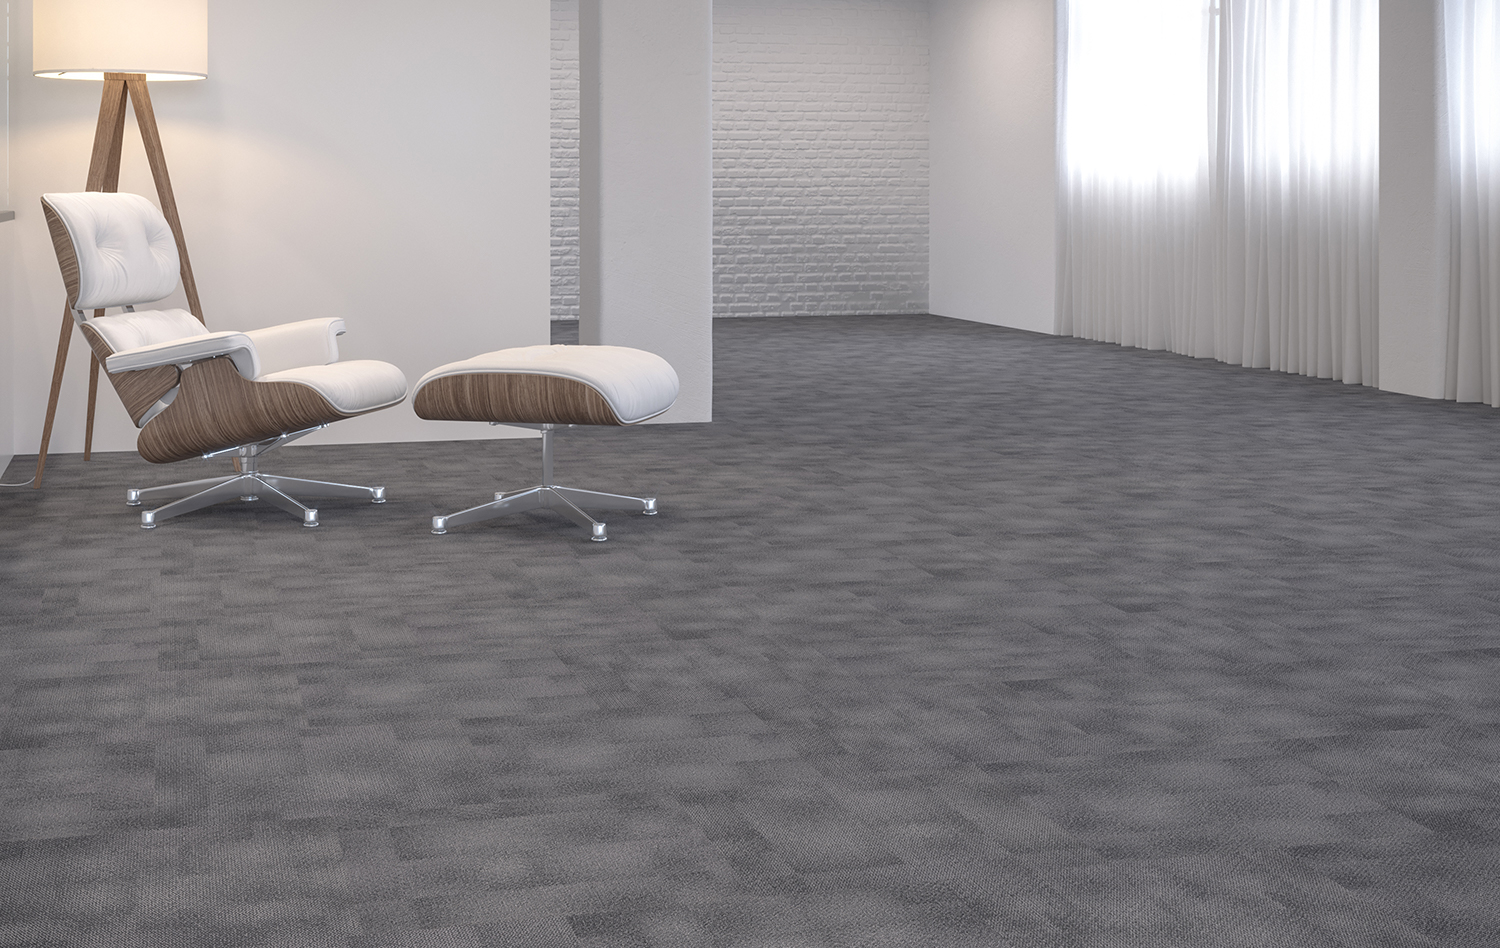 Freedom Pavement carpet tiles - on trend for offices